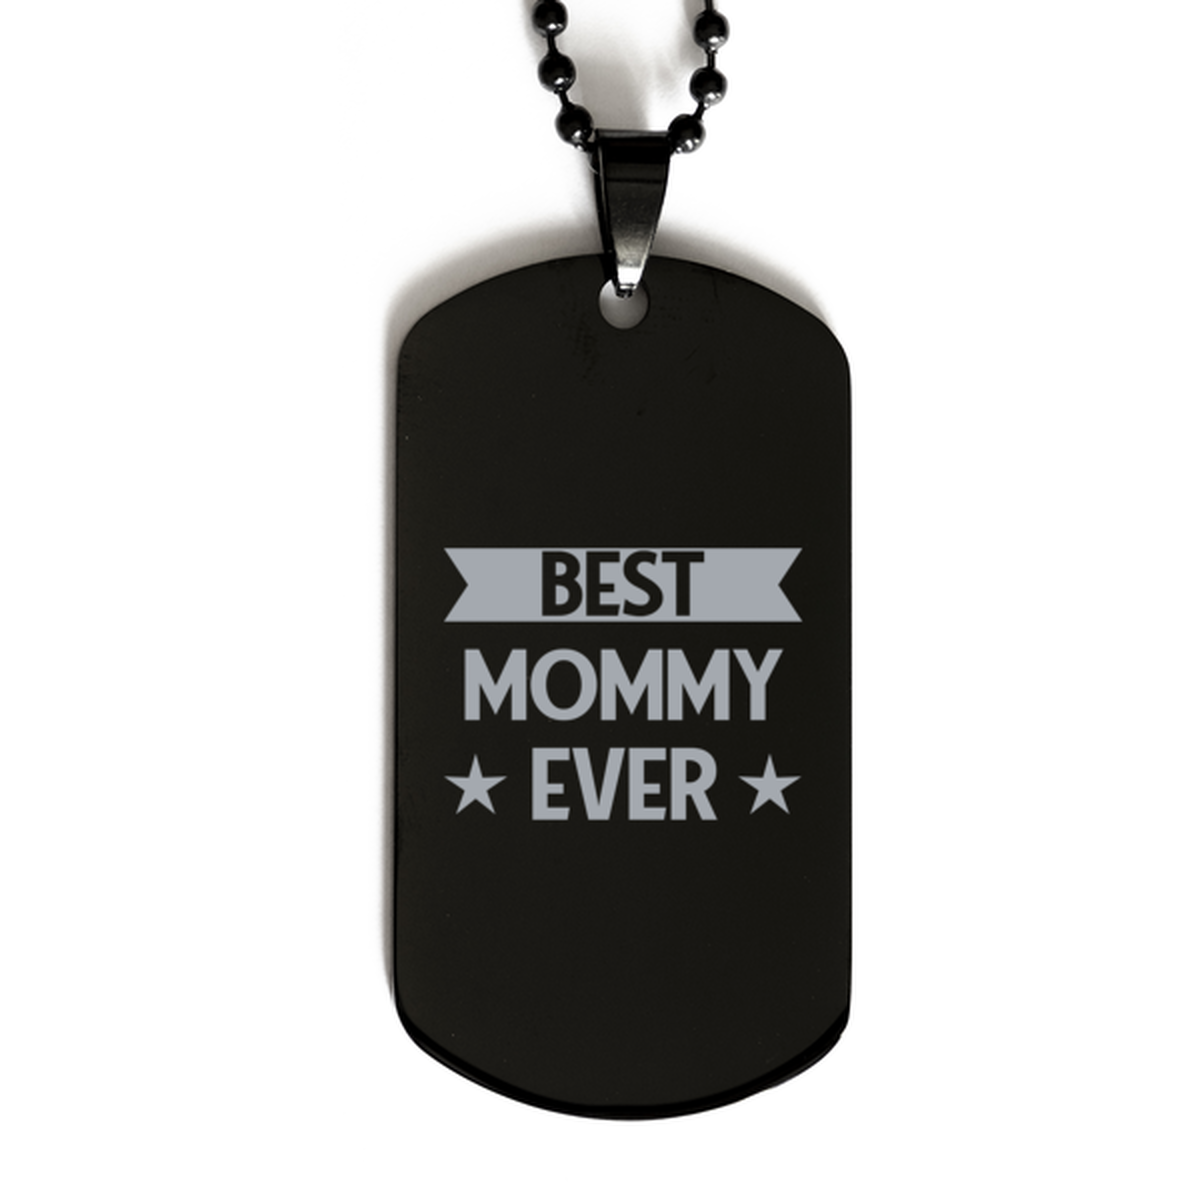 Best Mommy Ever Mommy Gifts, Funny Black Dog Tag For Mommy, Birthday Family Presents Engraved Necklace For Women